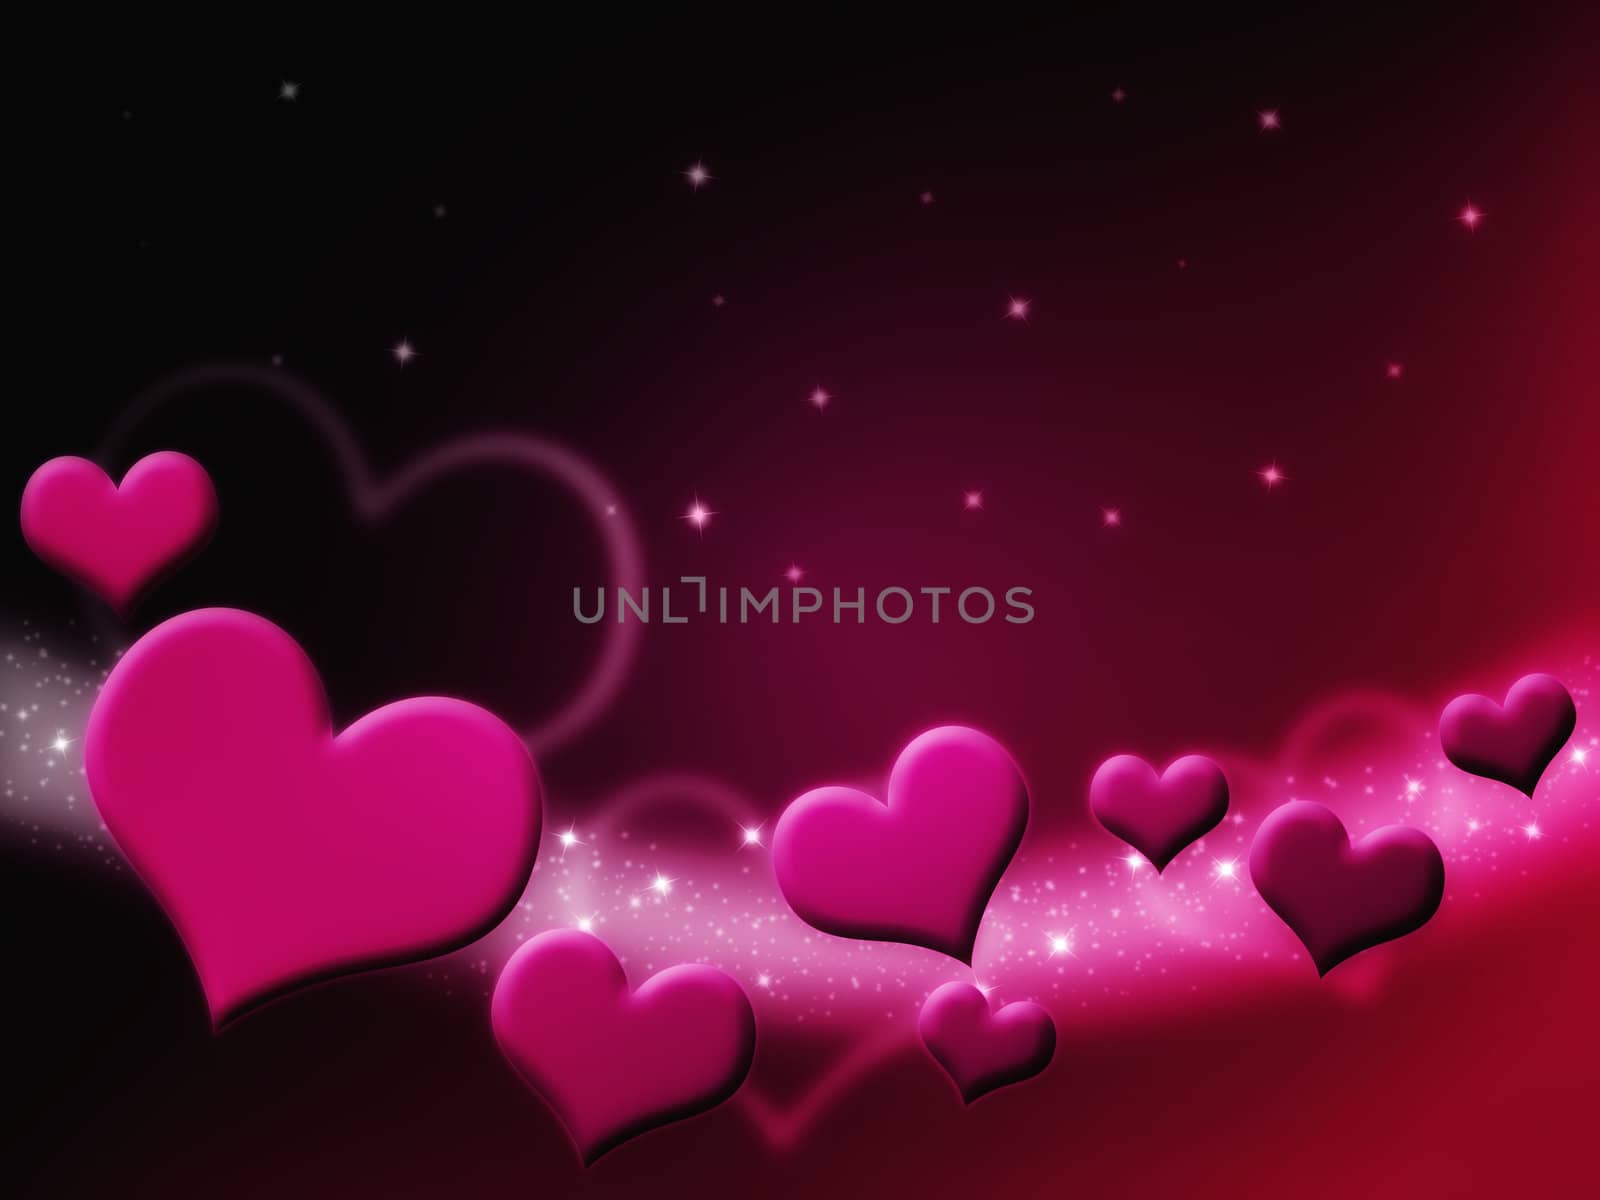 Valentines Day Card with pink Hearts and stars on starry background
